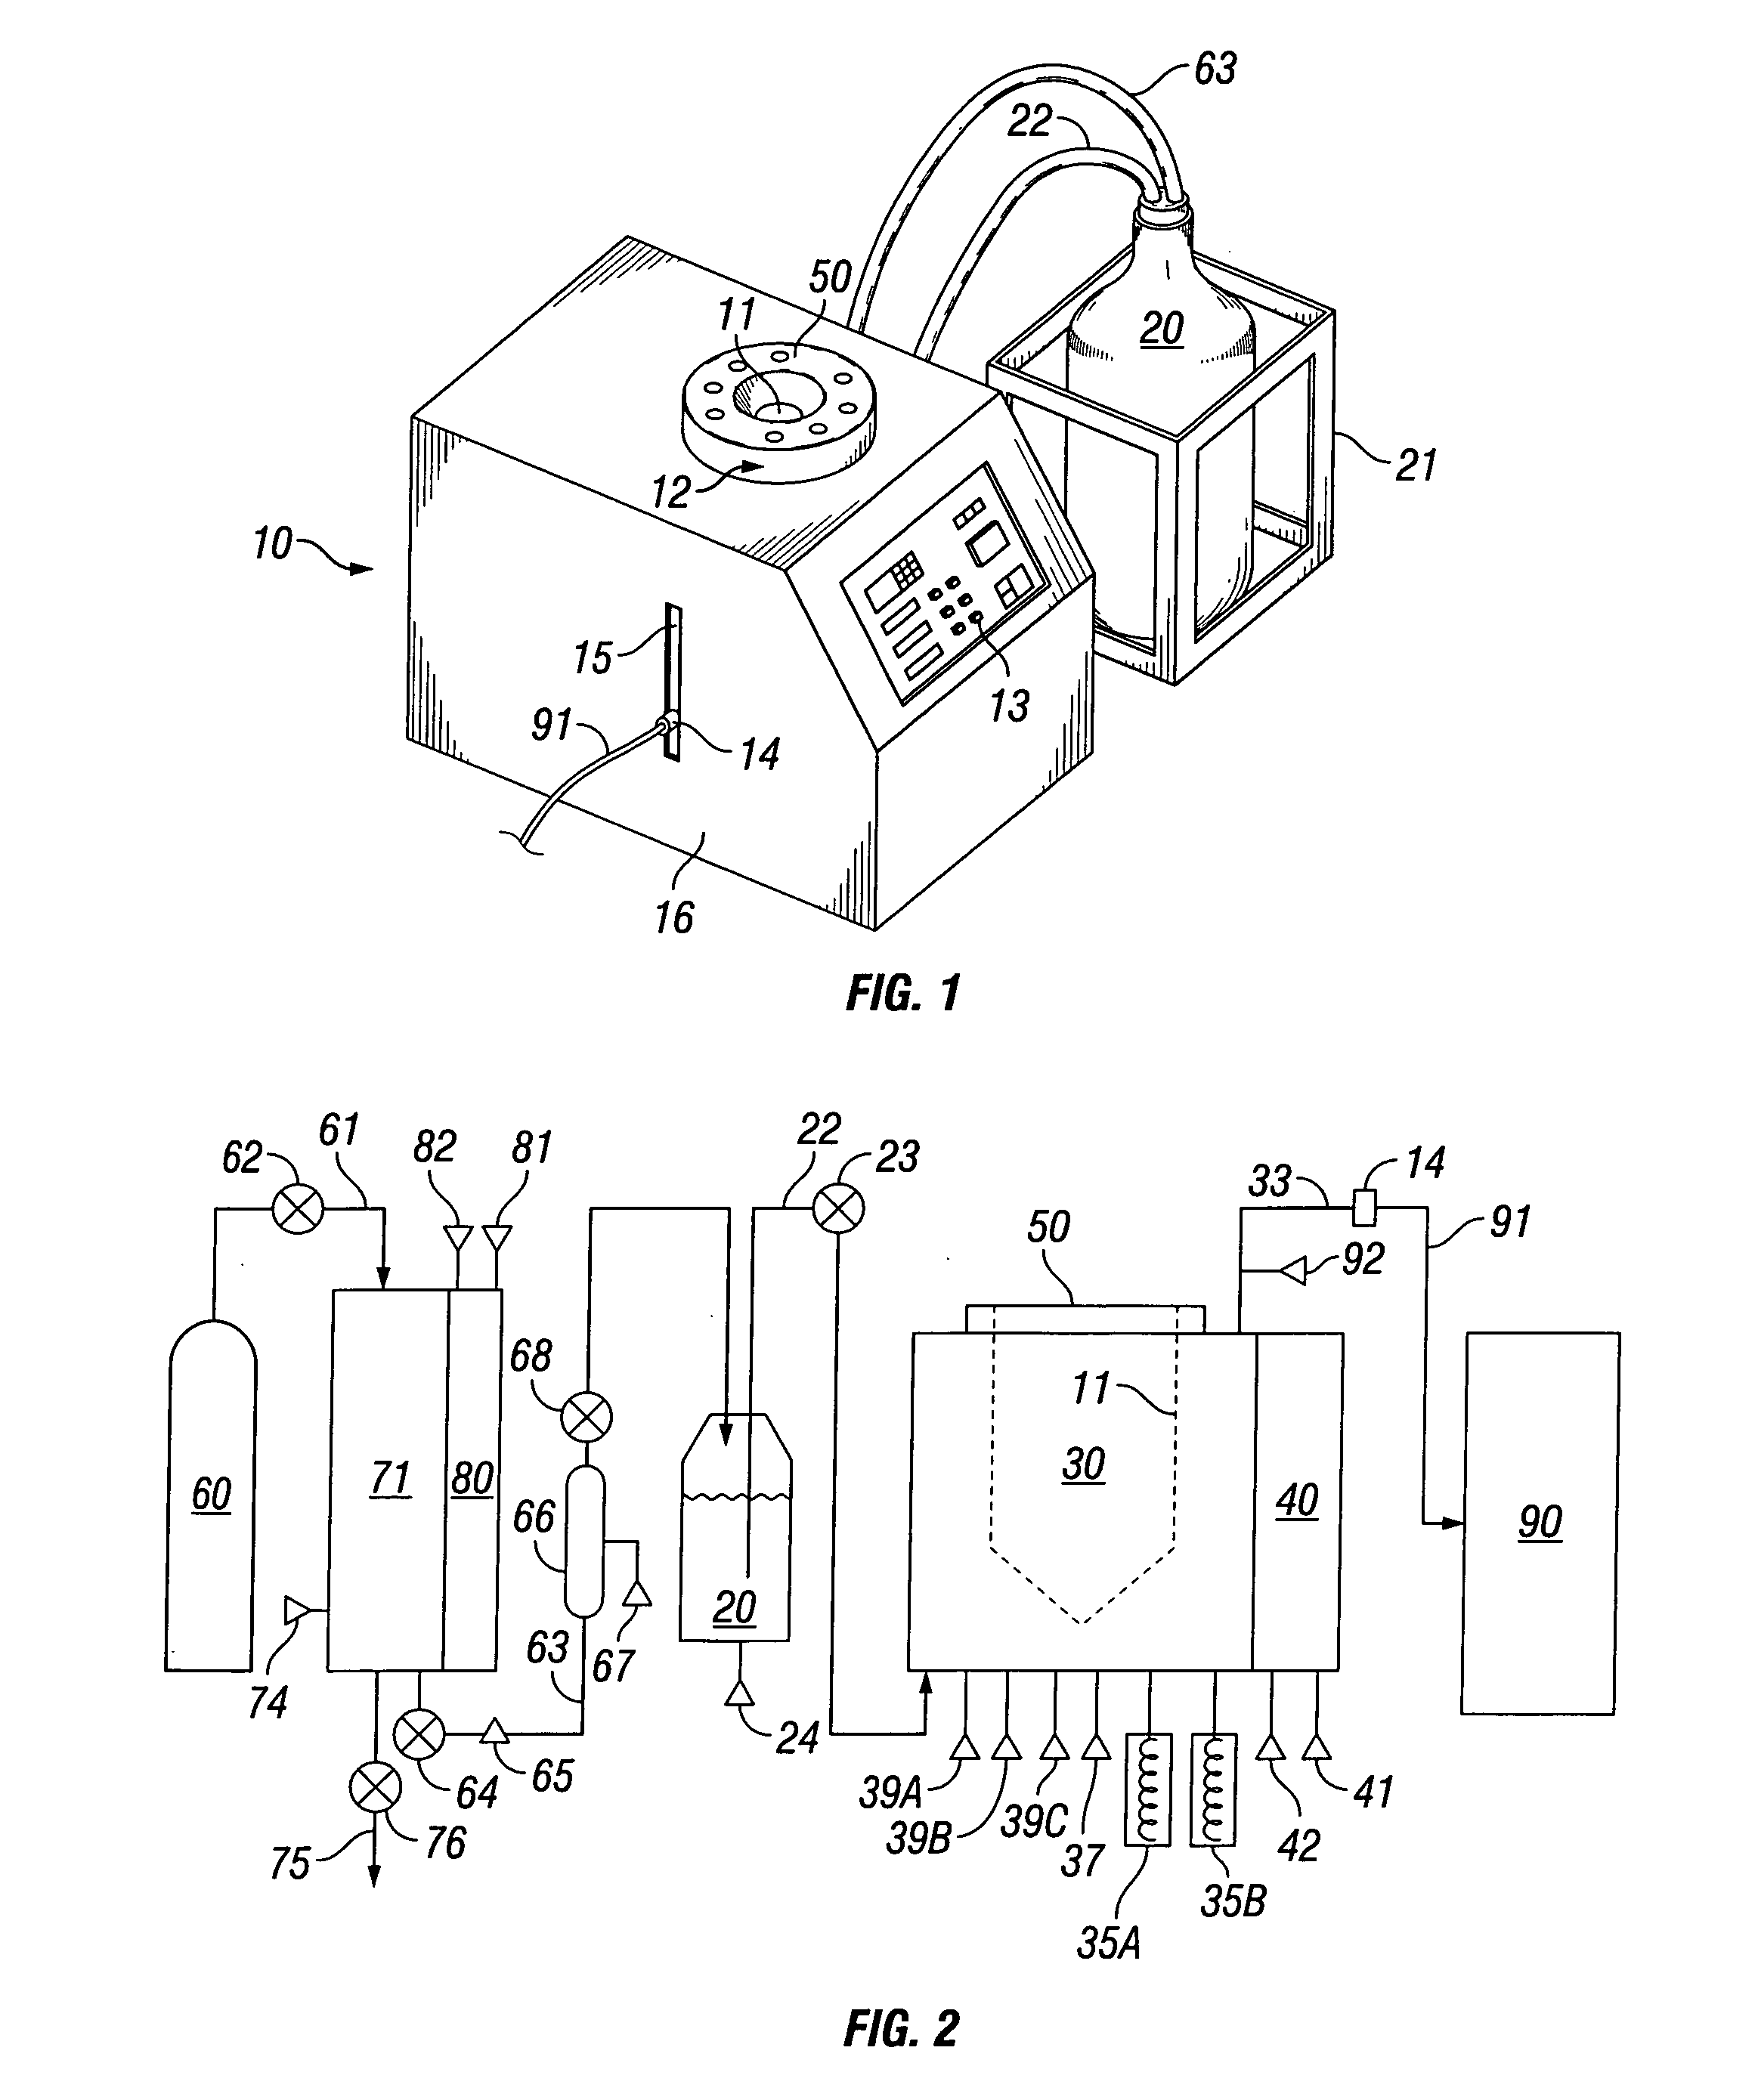 Apparatus for heating liquid samples for analysis